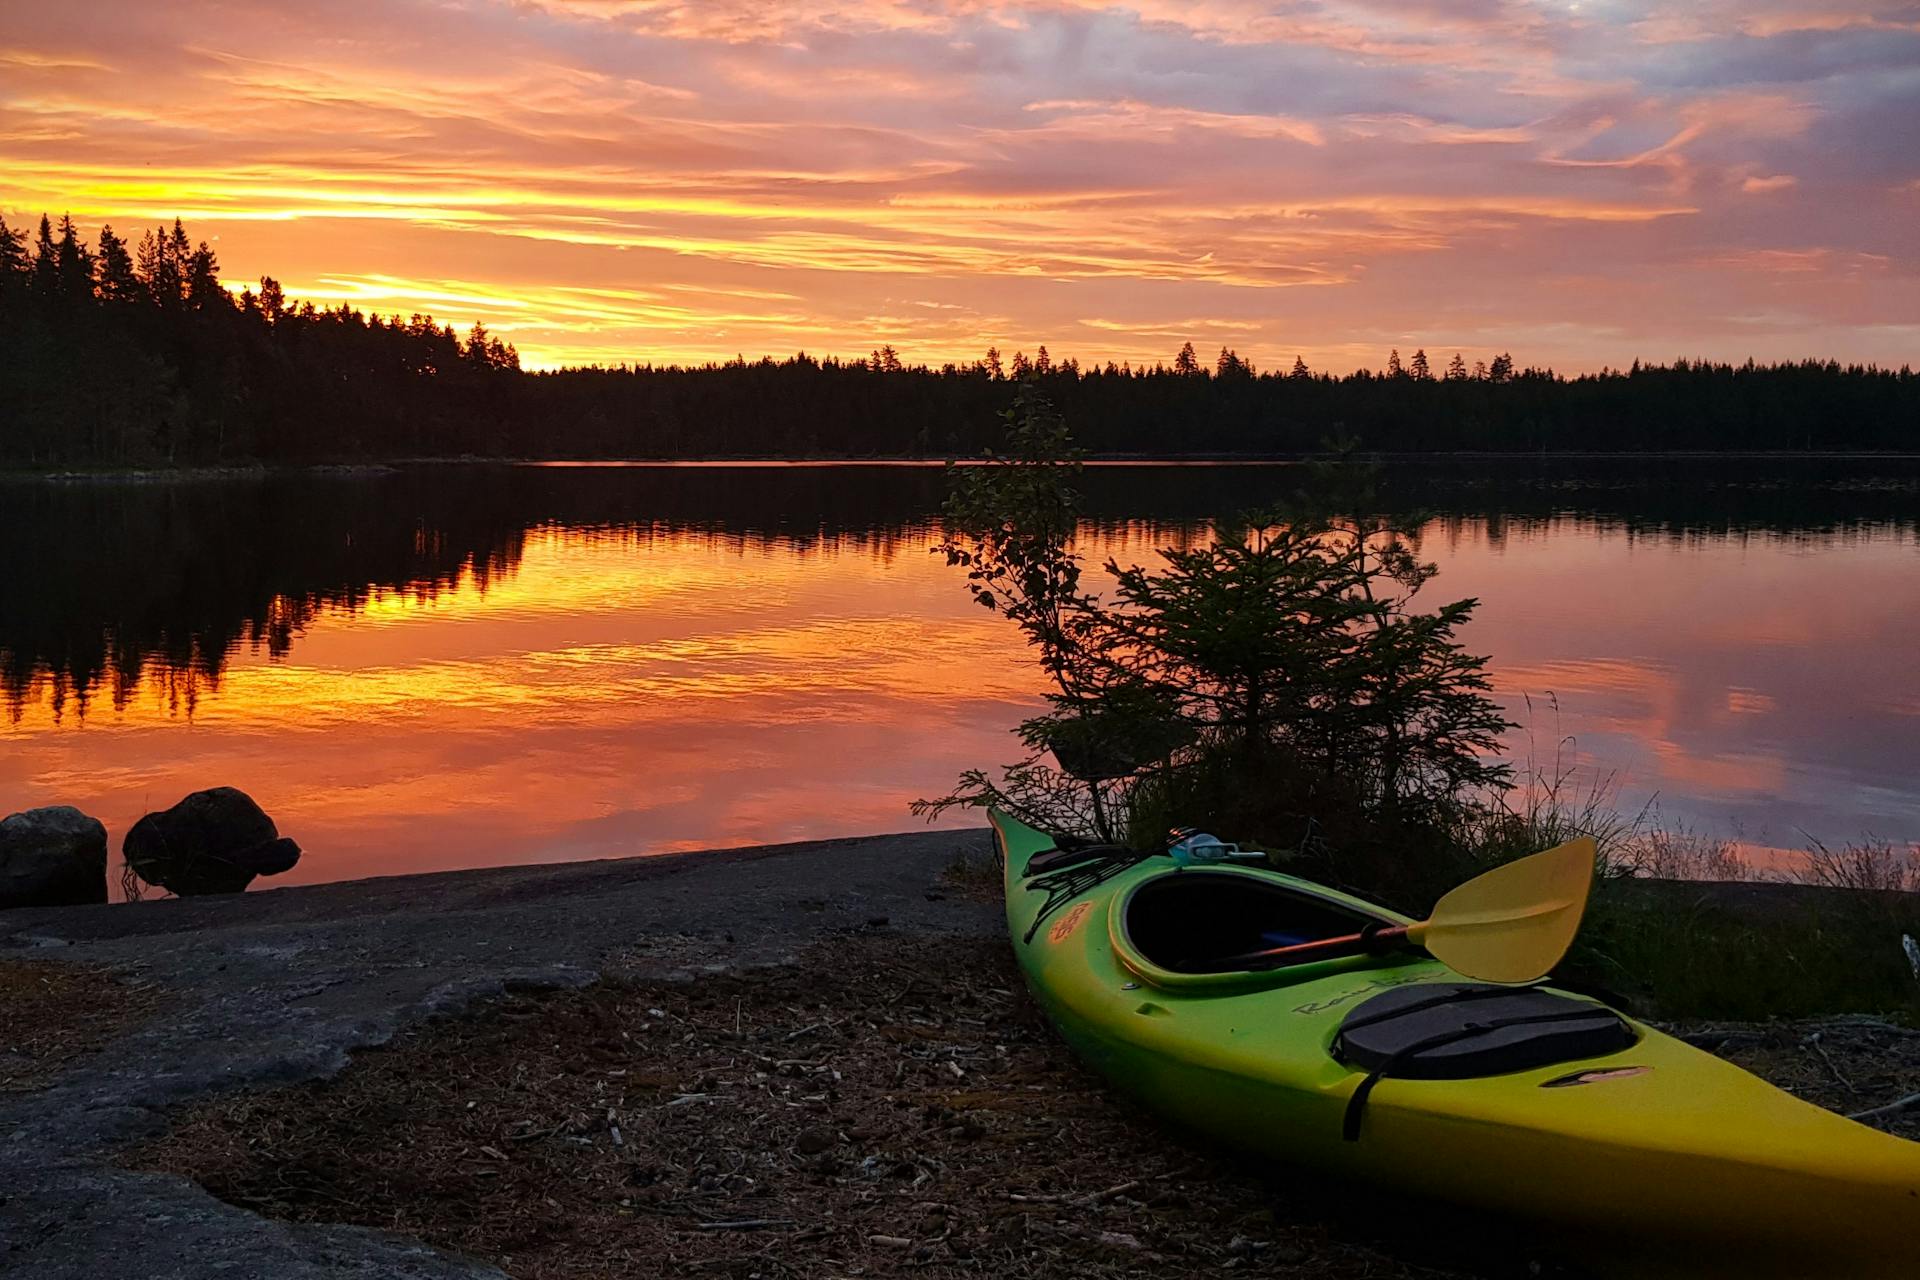 Kayak laying on the shore of a lake during a beautiful sunset in the Malingsbo-Kloten Nature Reserve in Sweden.